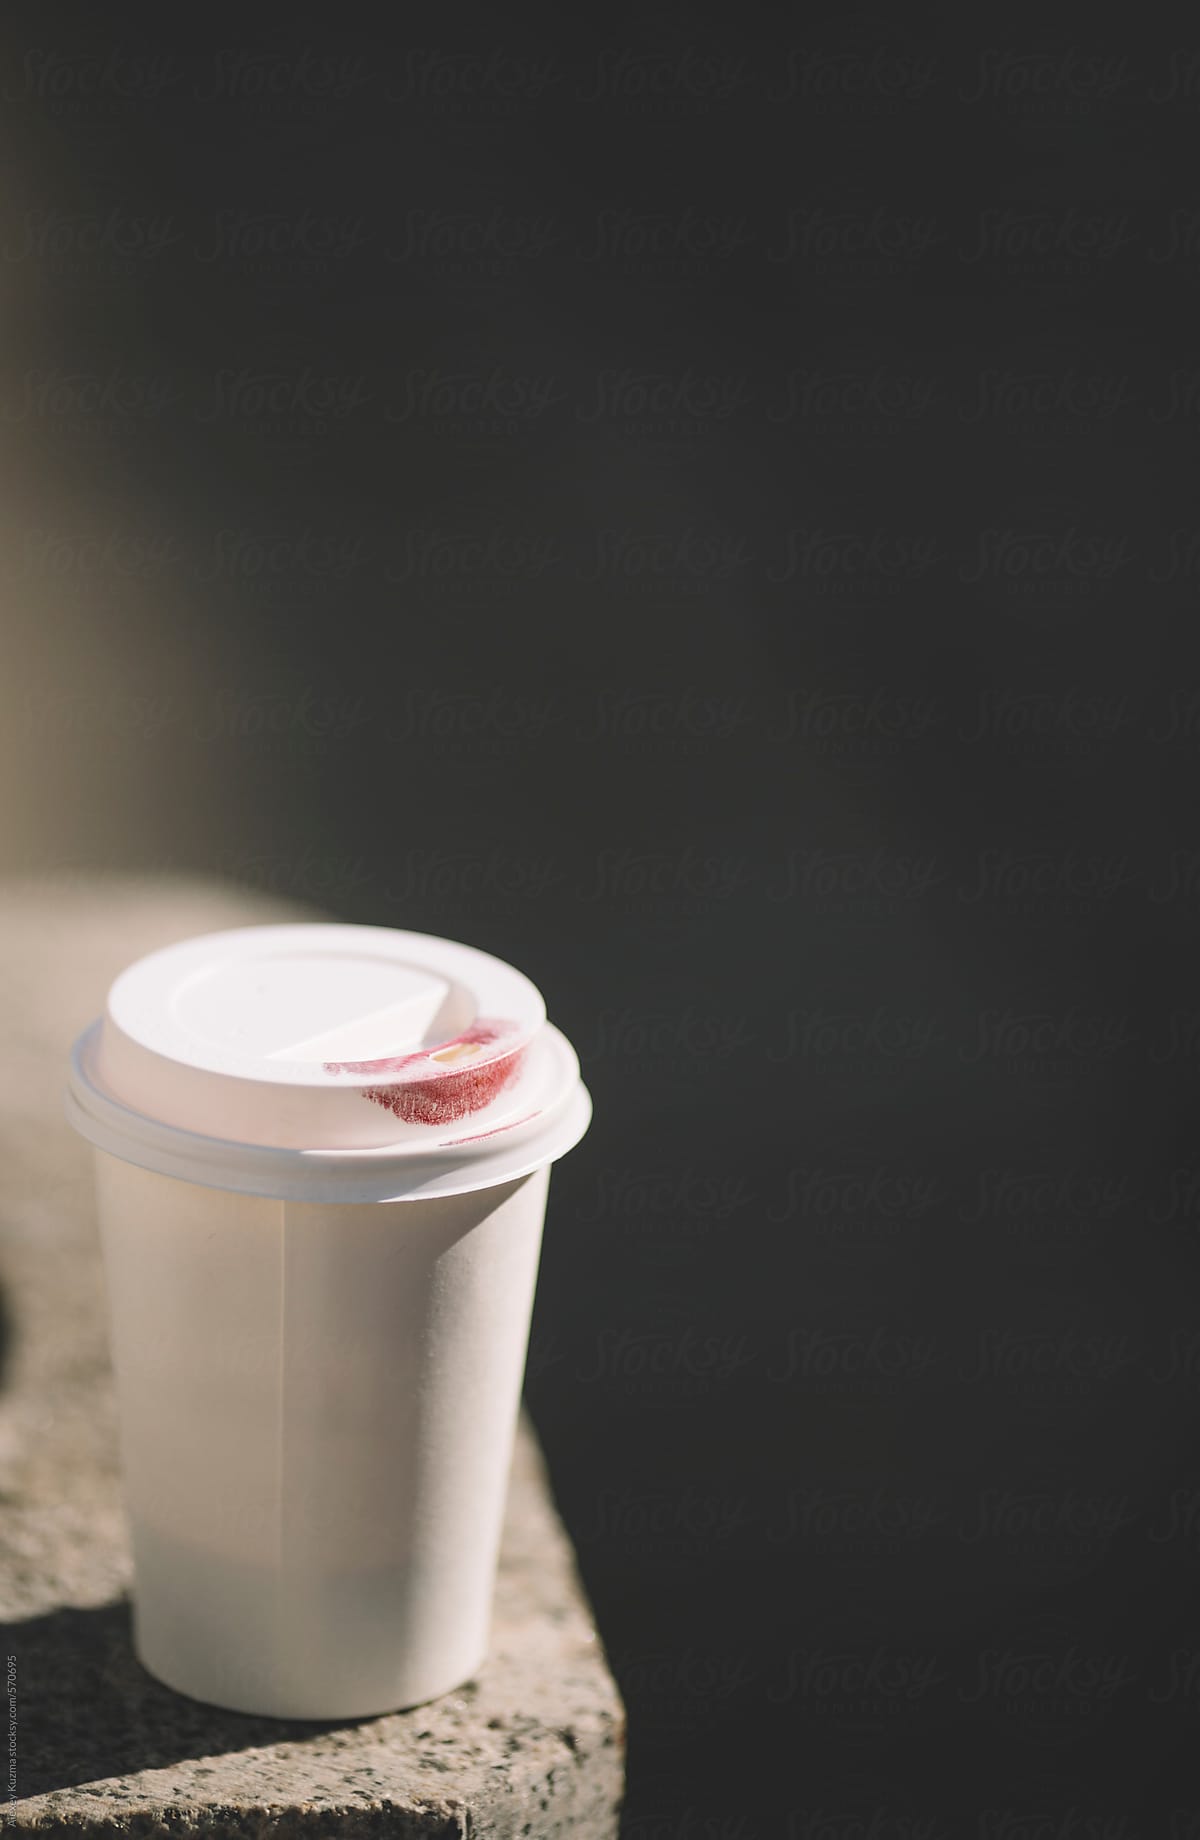 paper drinking cup with lipstic print